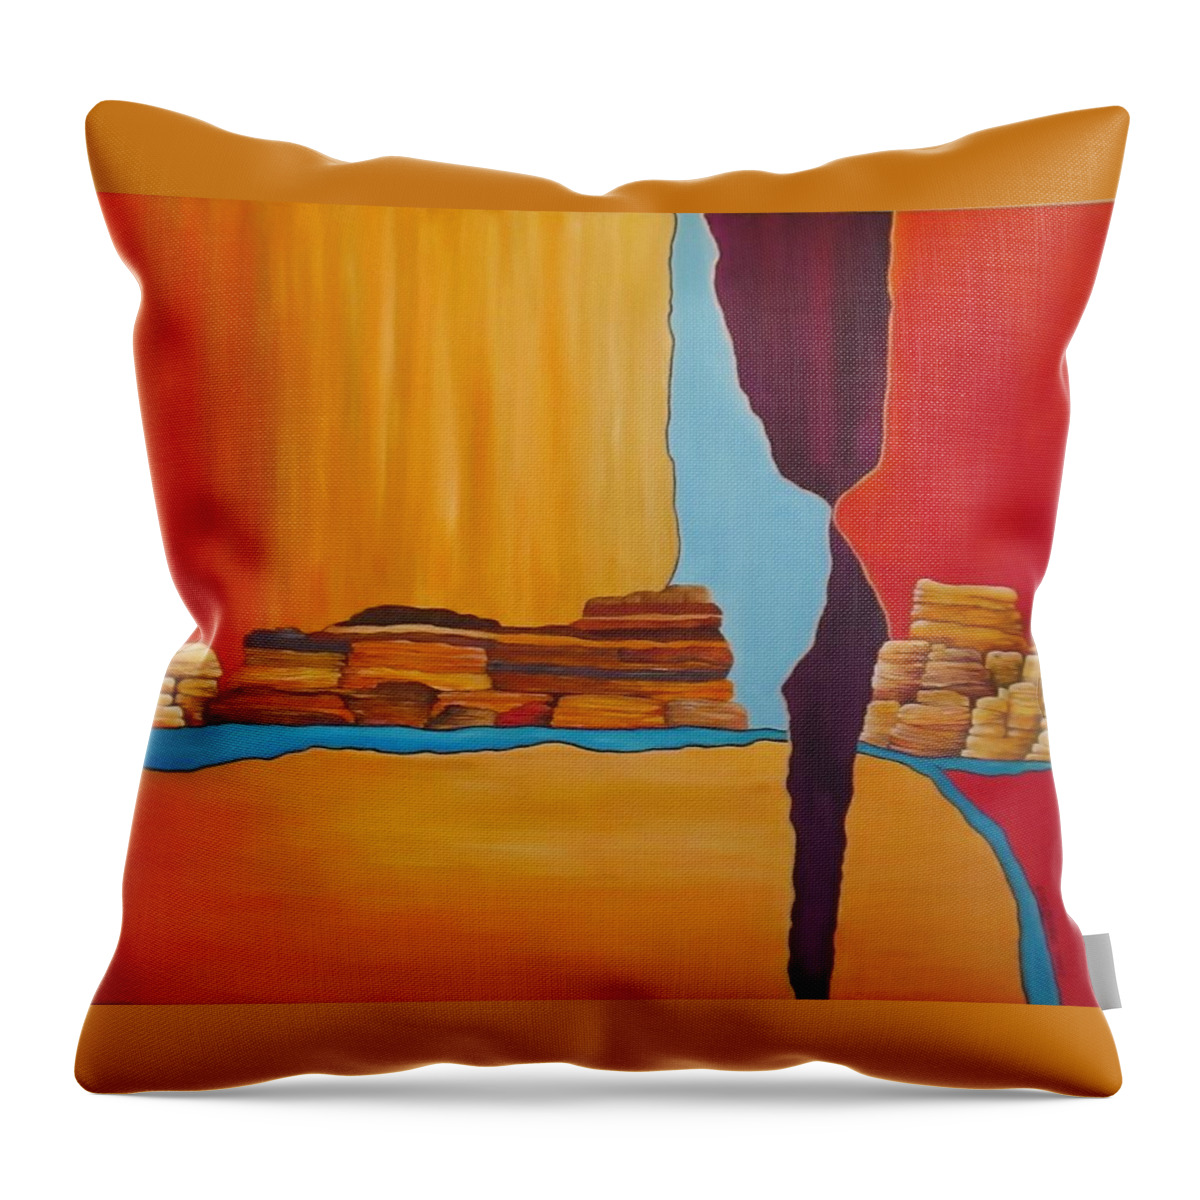 Desert Throw Pillow featuring the painting Desert Canyon Dreams by Carol Sabo